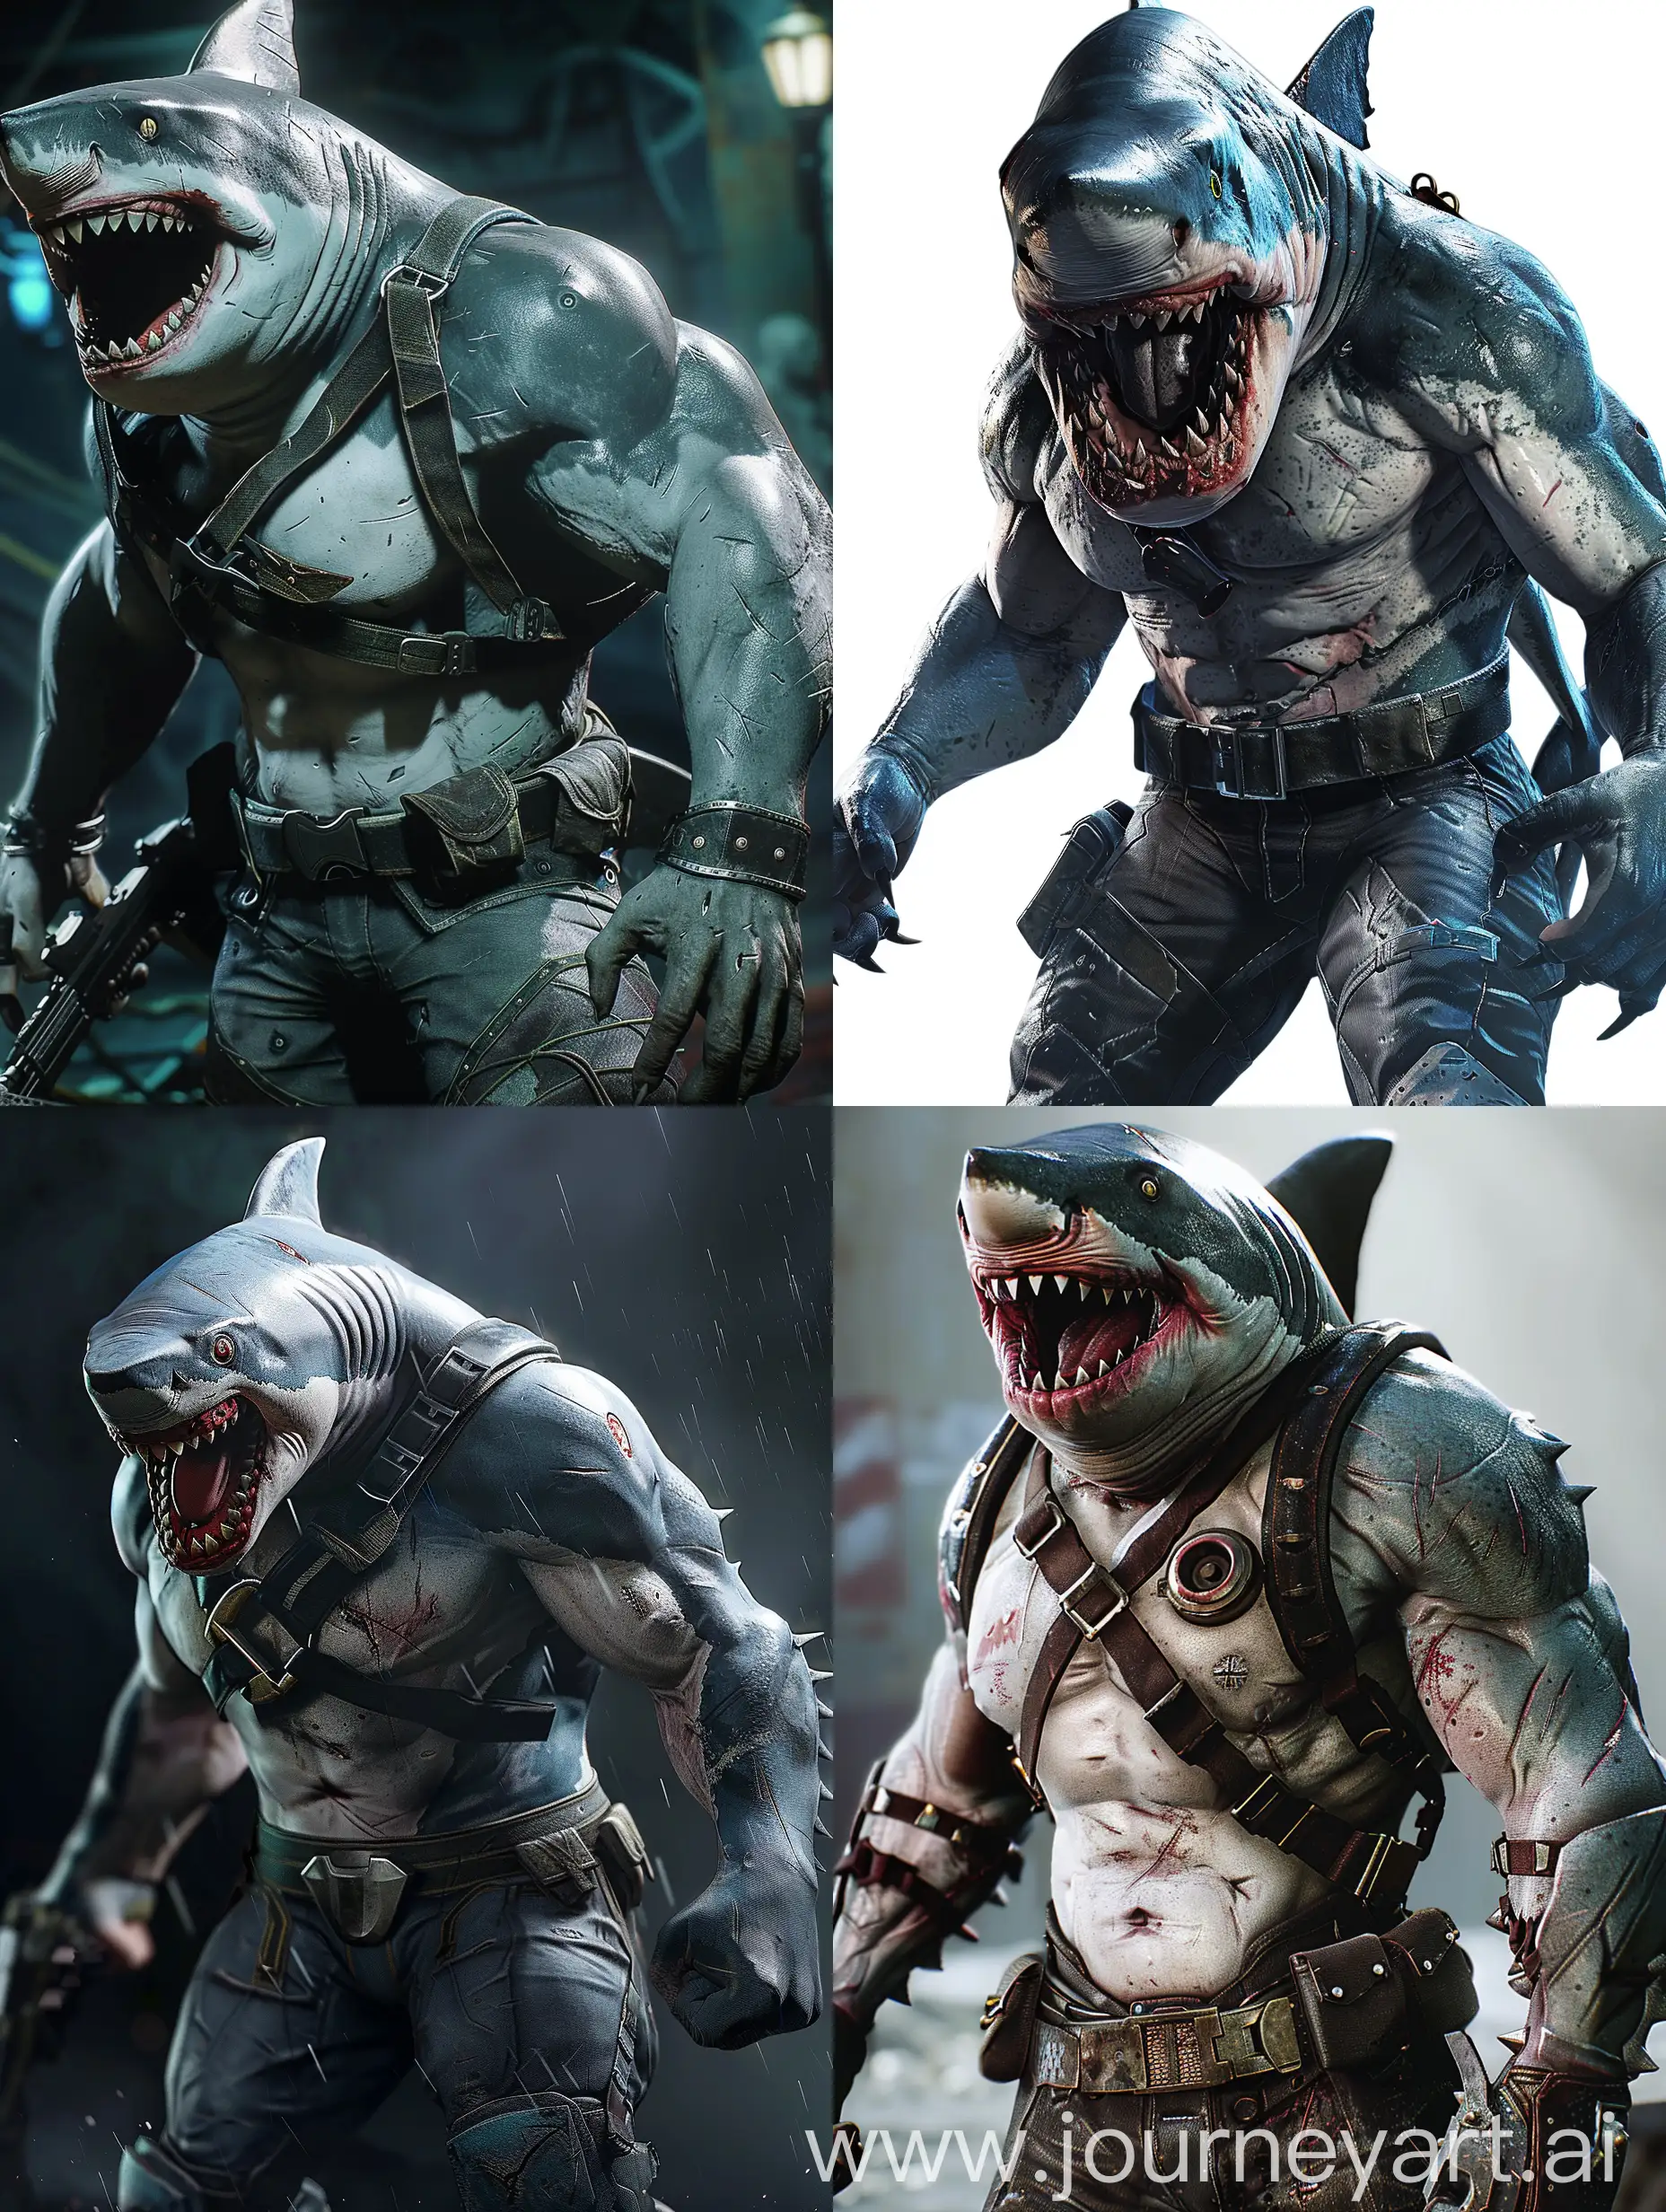 King Shark from the game "Suicide Squad" 